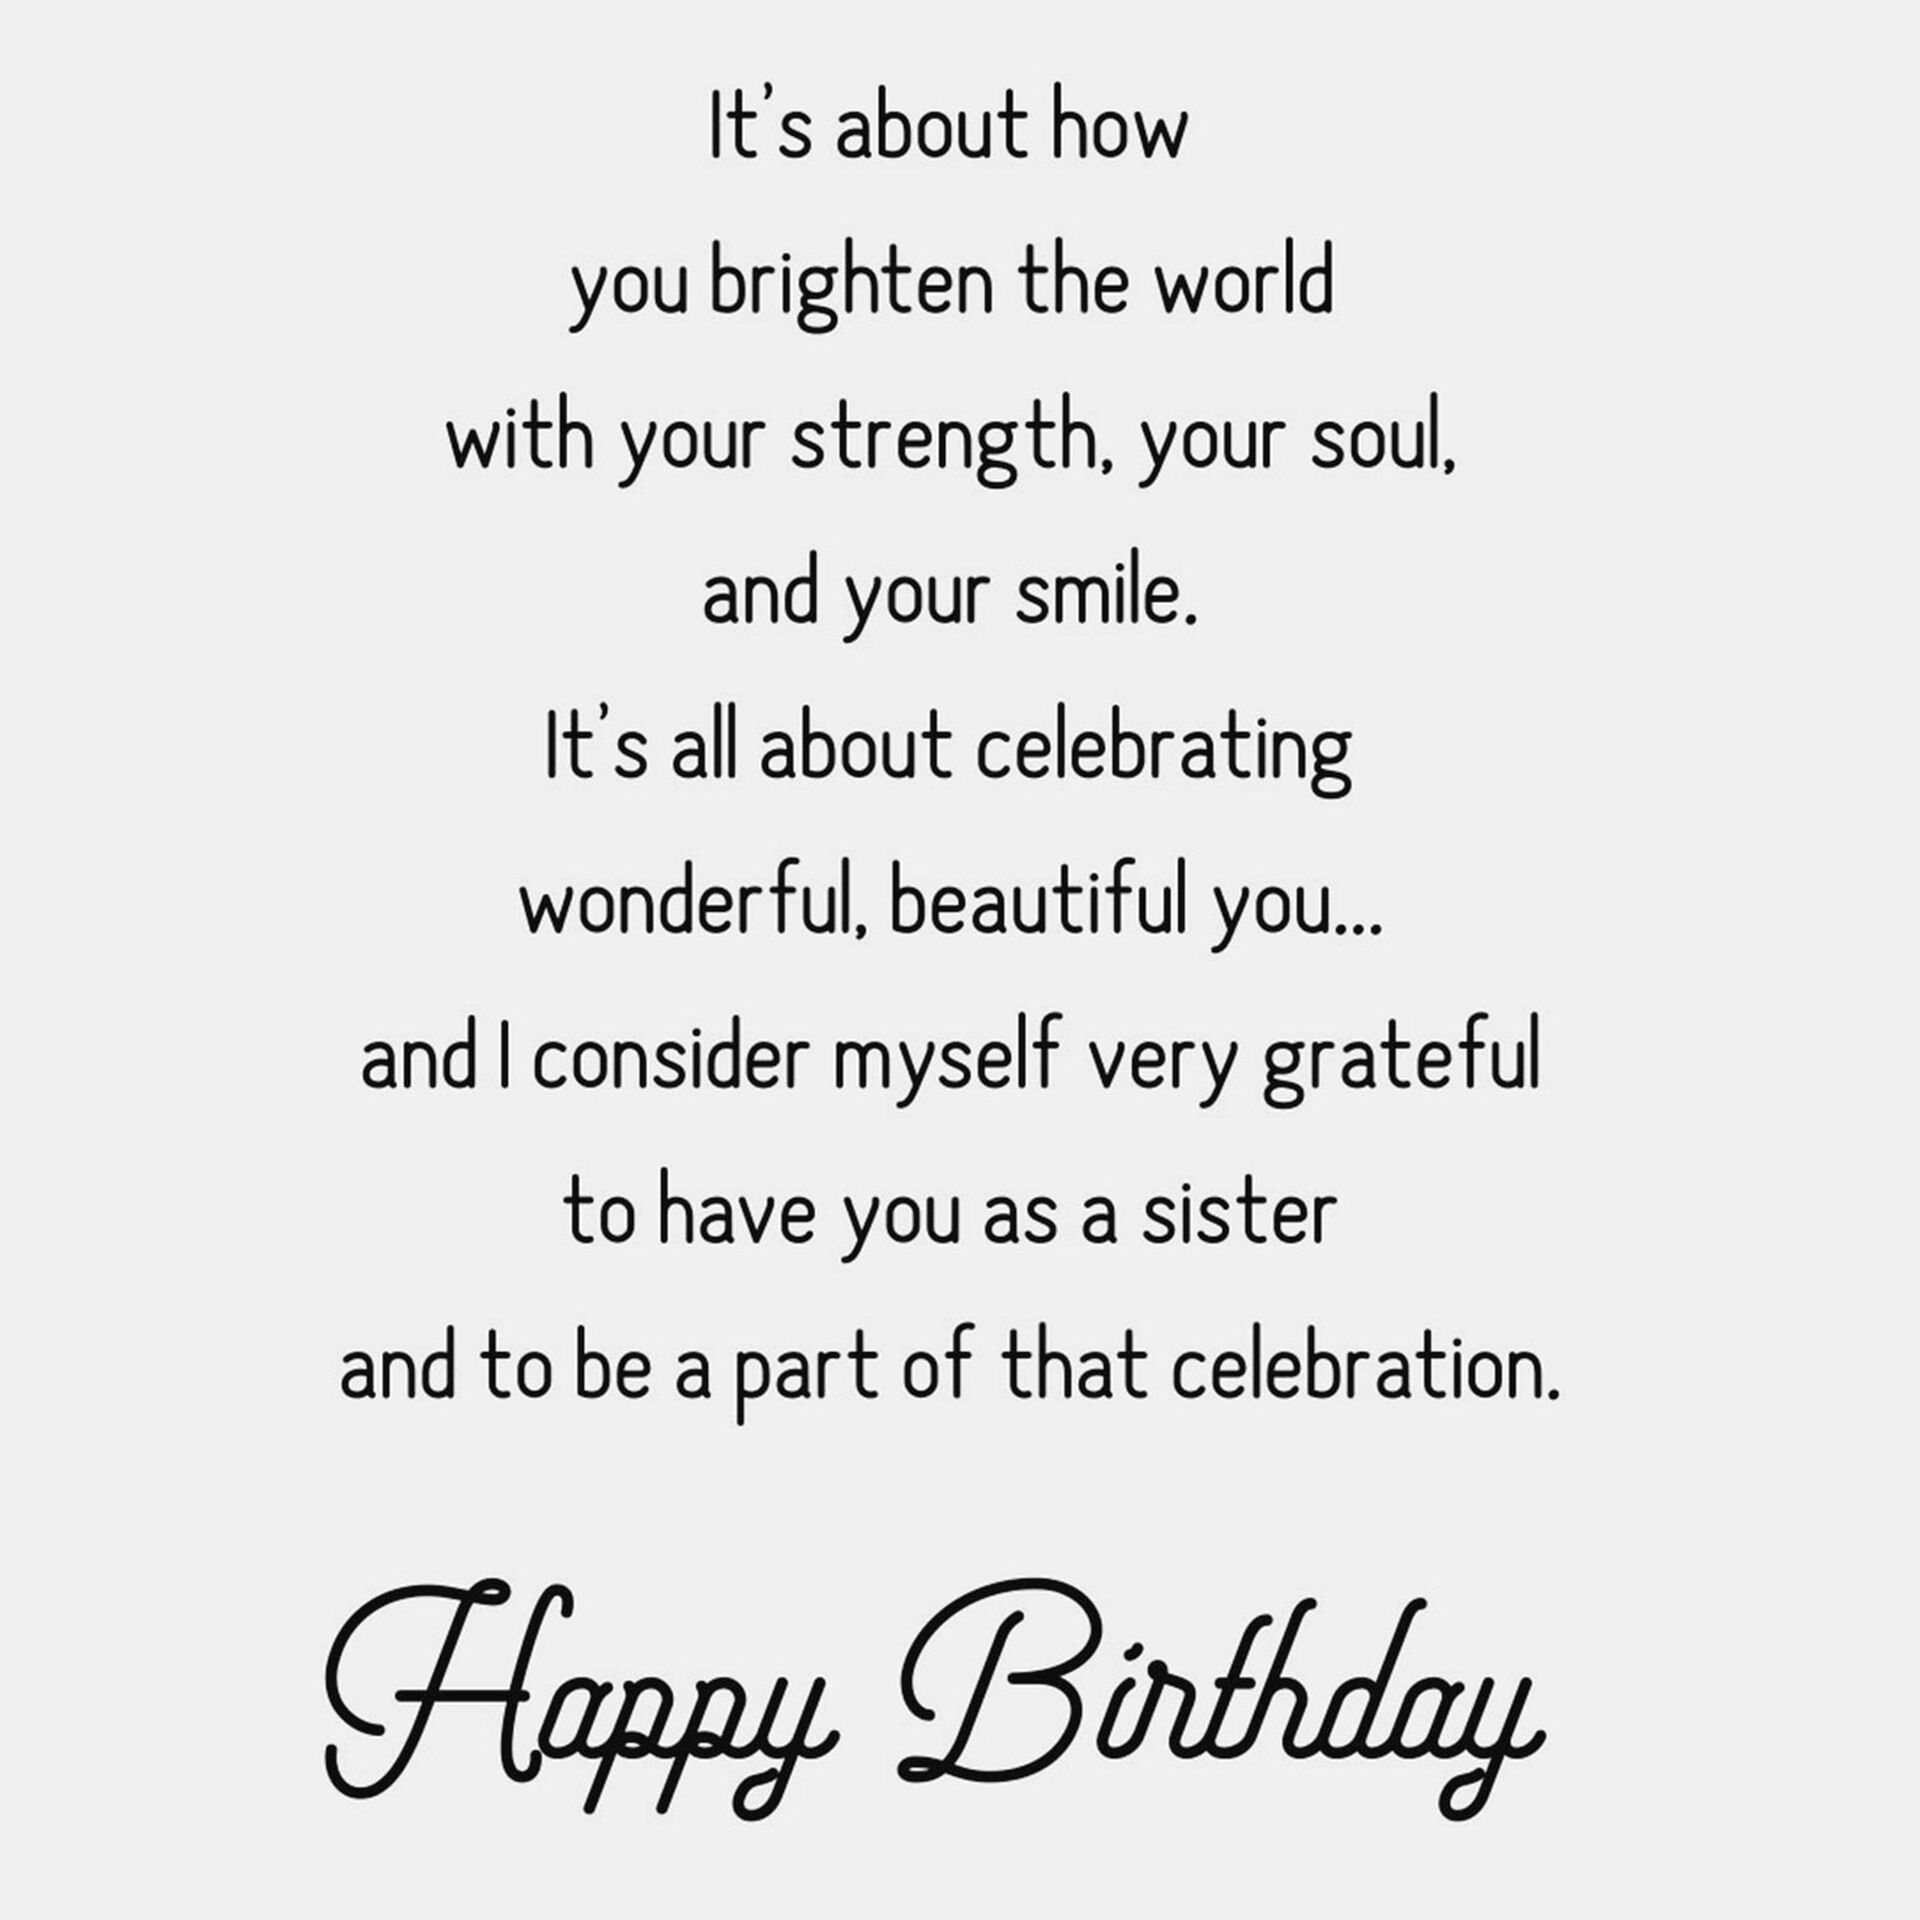 Wonderful, Beautiful You Birthday Card for Sister - Greeting Cards ...